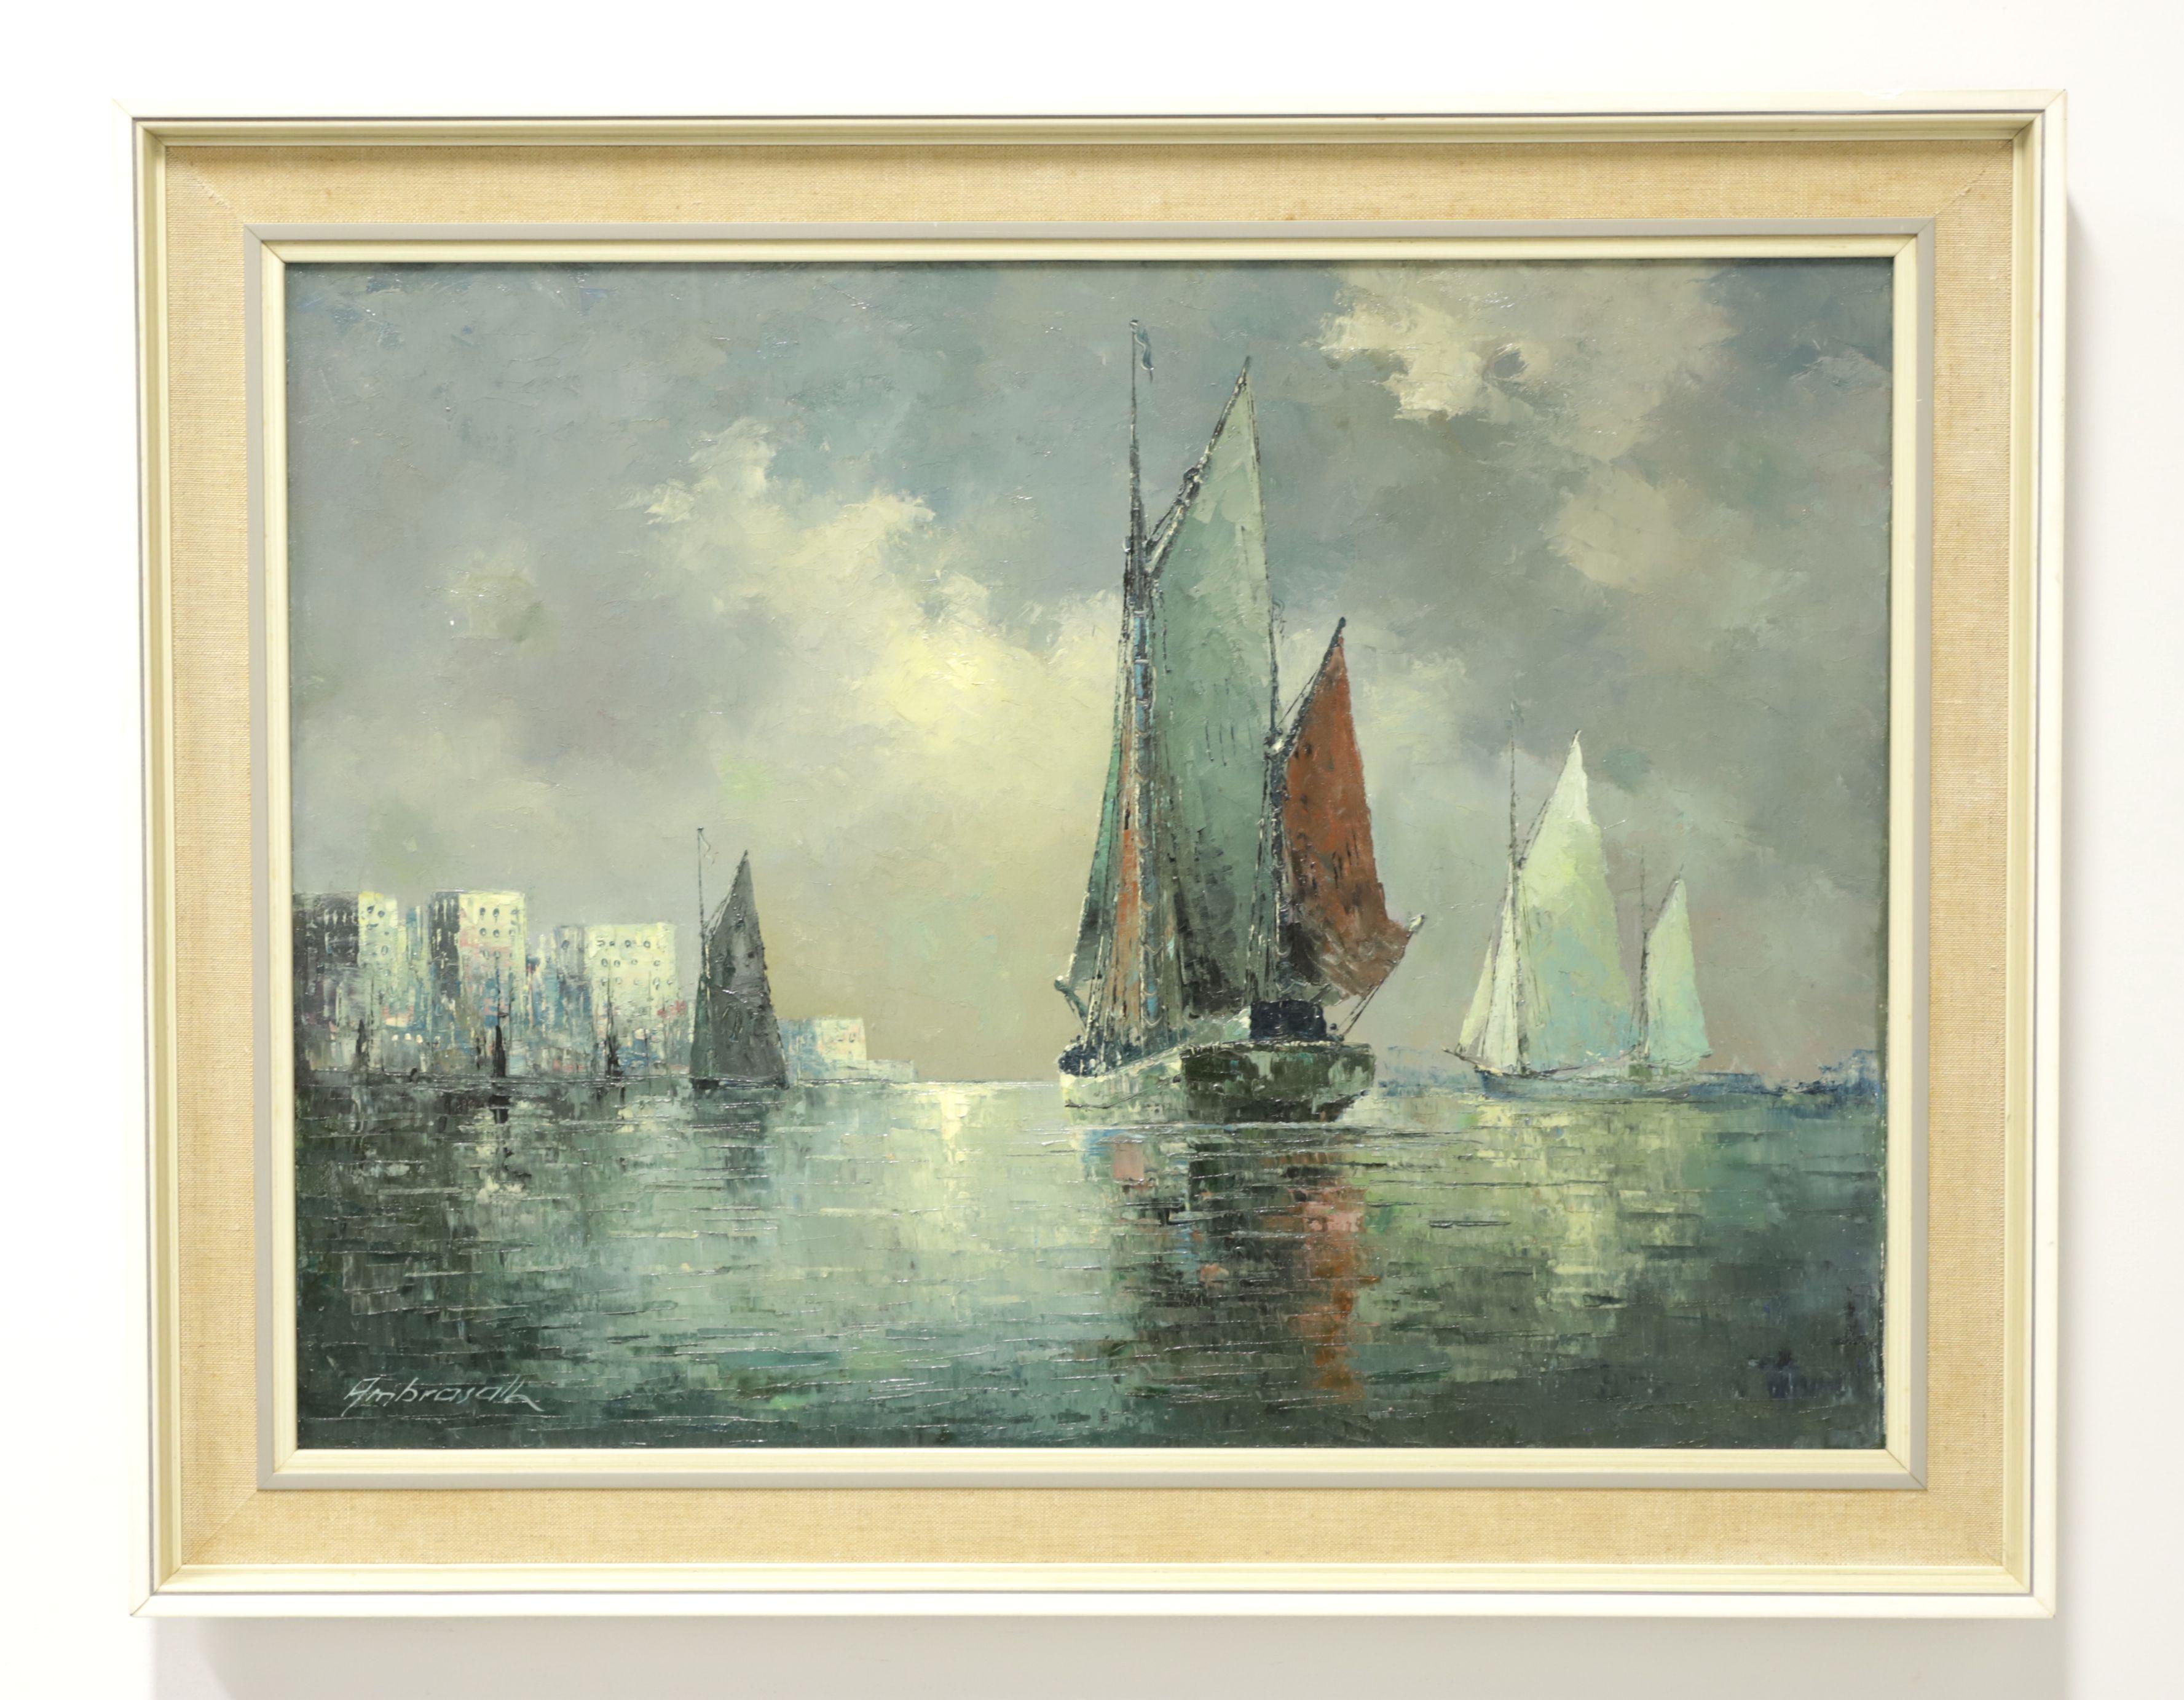 Mid 20th Century Oil on Canvas Painting - Sailboats in Moody Harbor - Signed 1